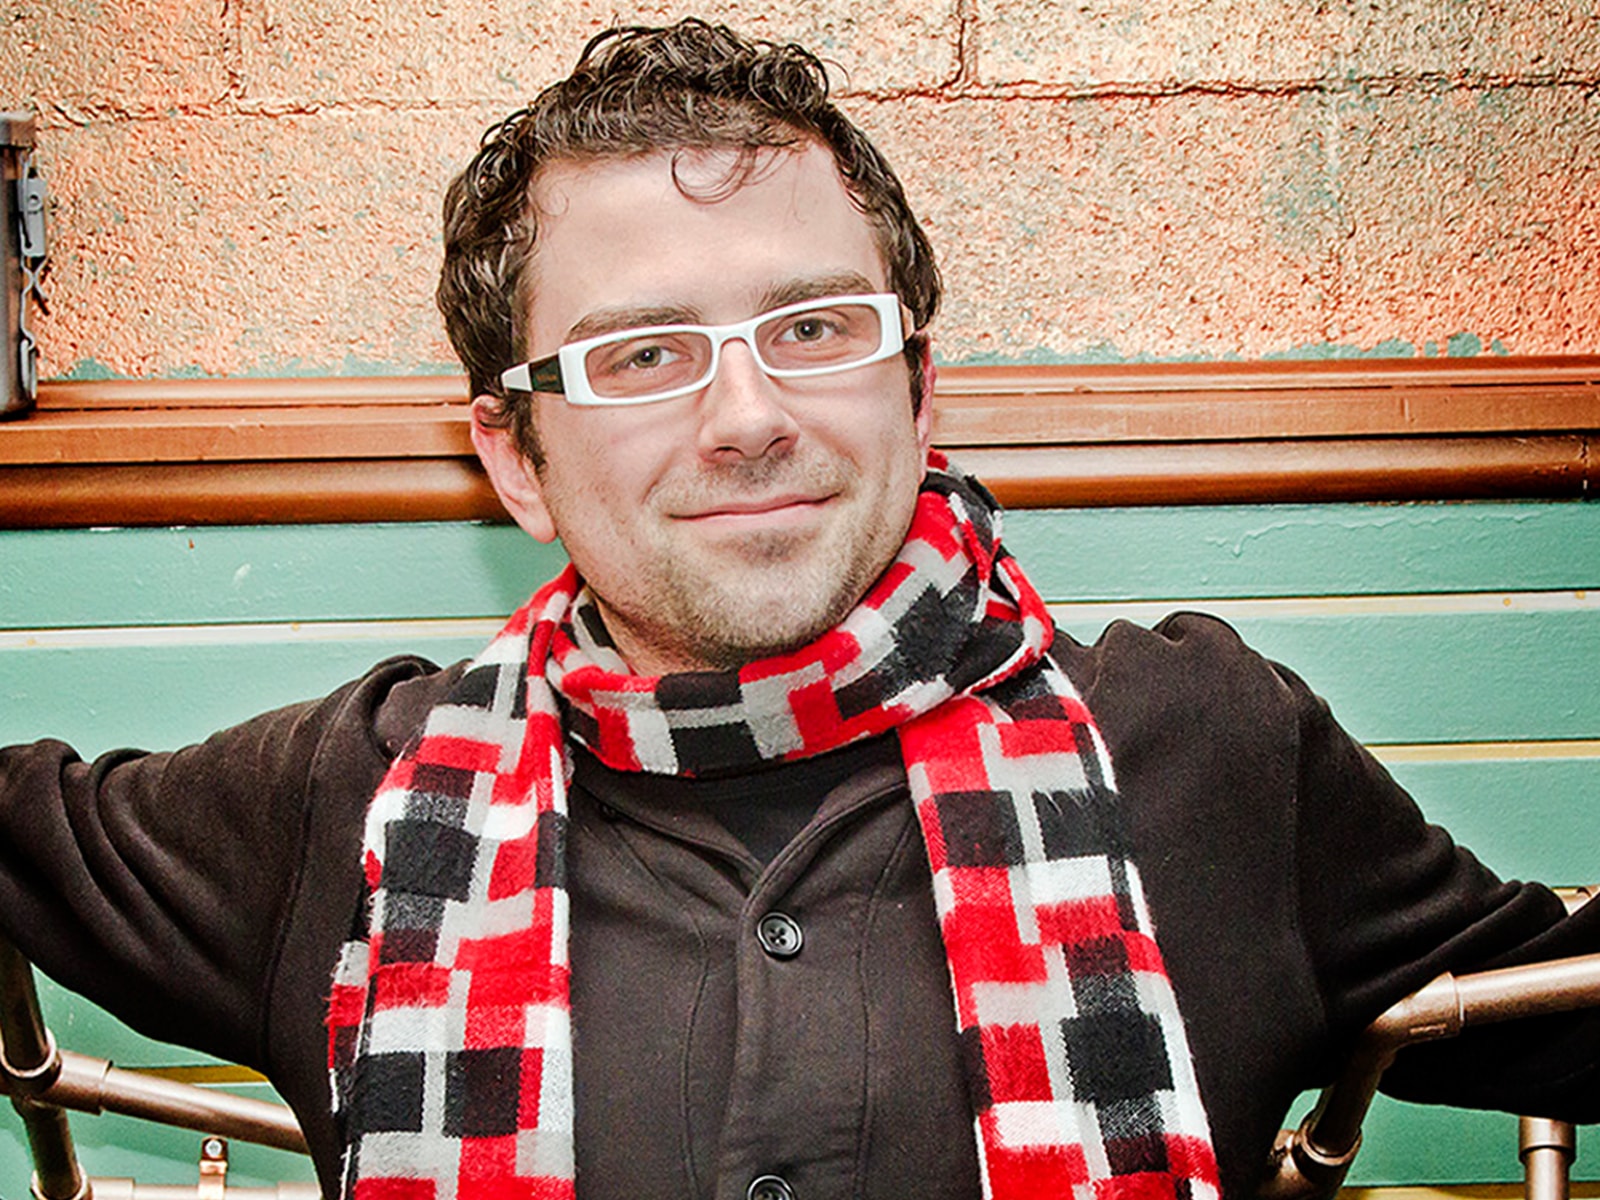 DigiPen alumnus Nate Martin in a plaid scarf, black coat and white-framed glasses with a prop made of bronze-colored pipes